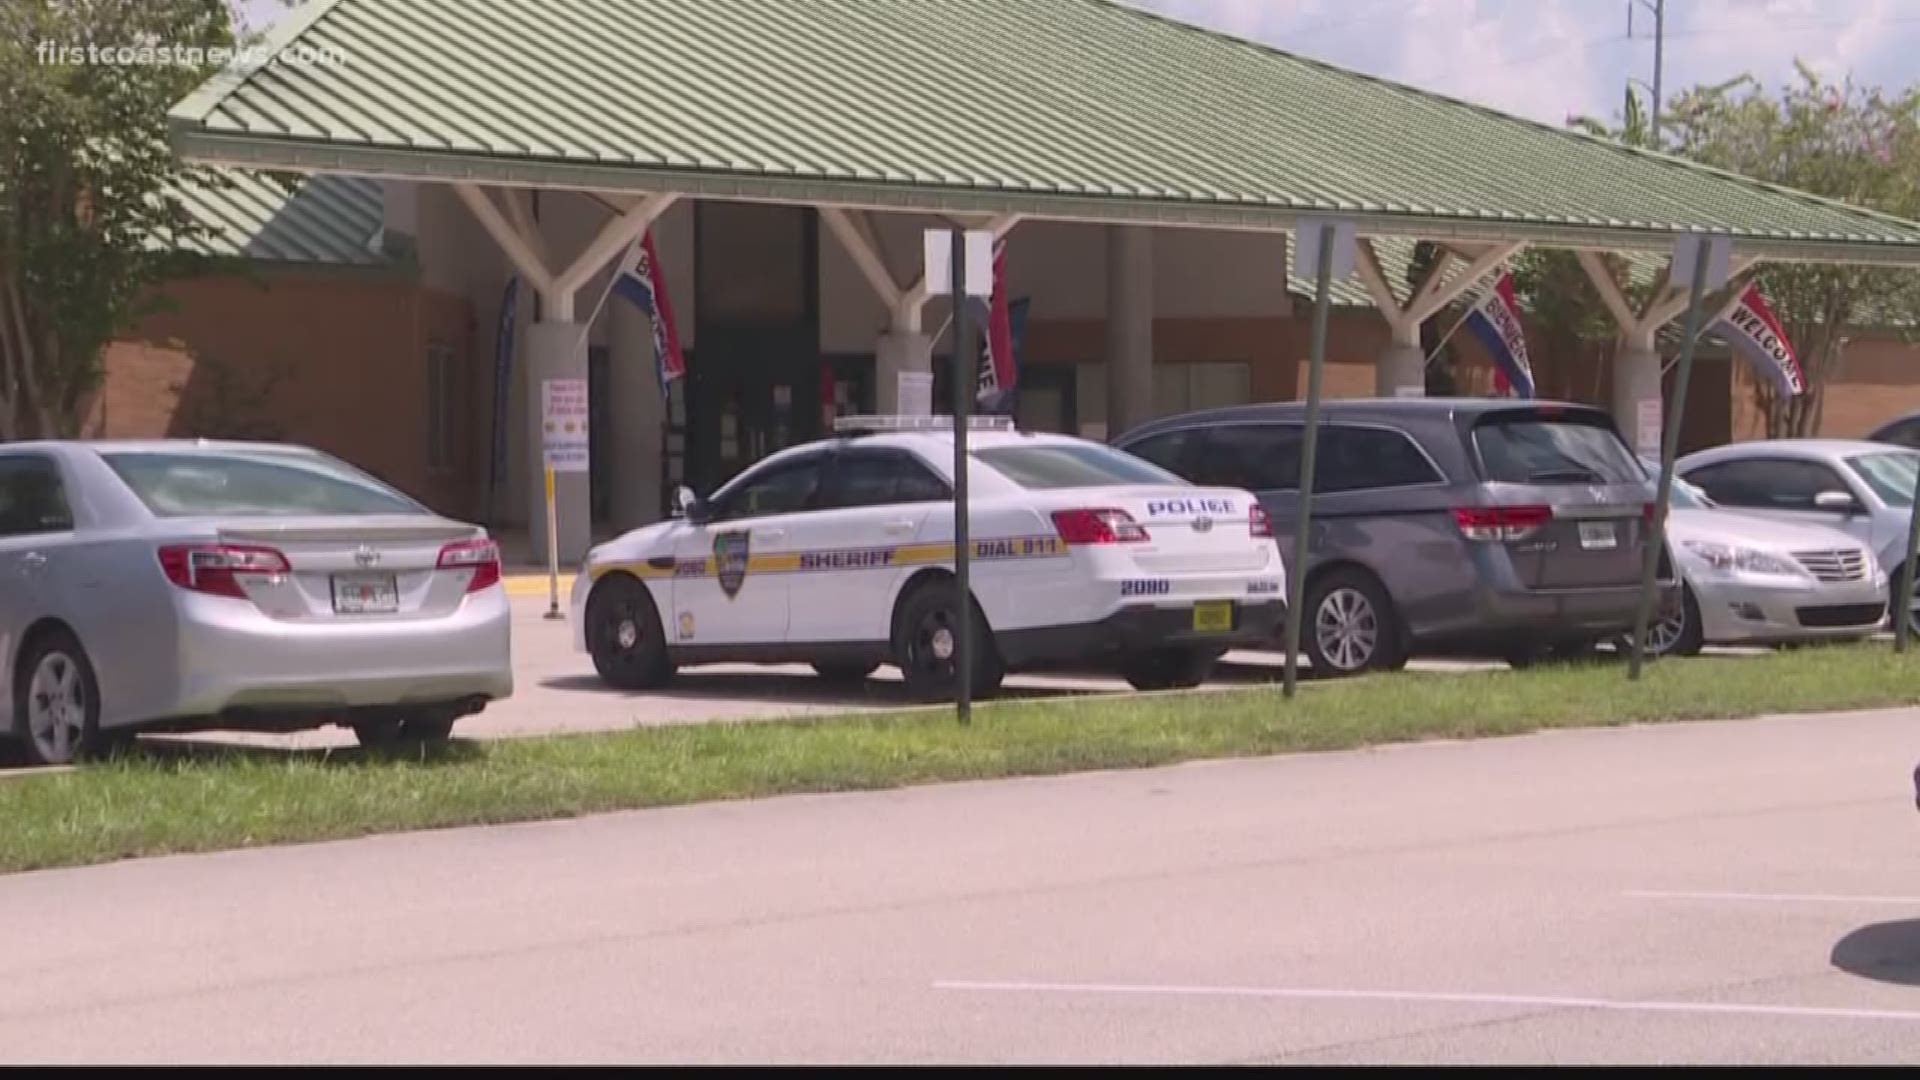 A parent was arrested Friday after he walked into Beauclerc Elementary with a concealed gun on his hip, according to the Jacksonville Sheriff's Office.